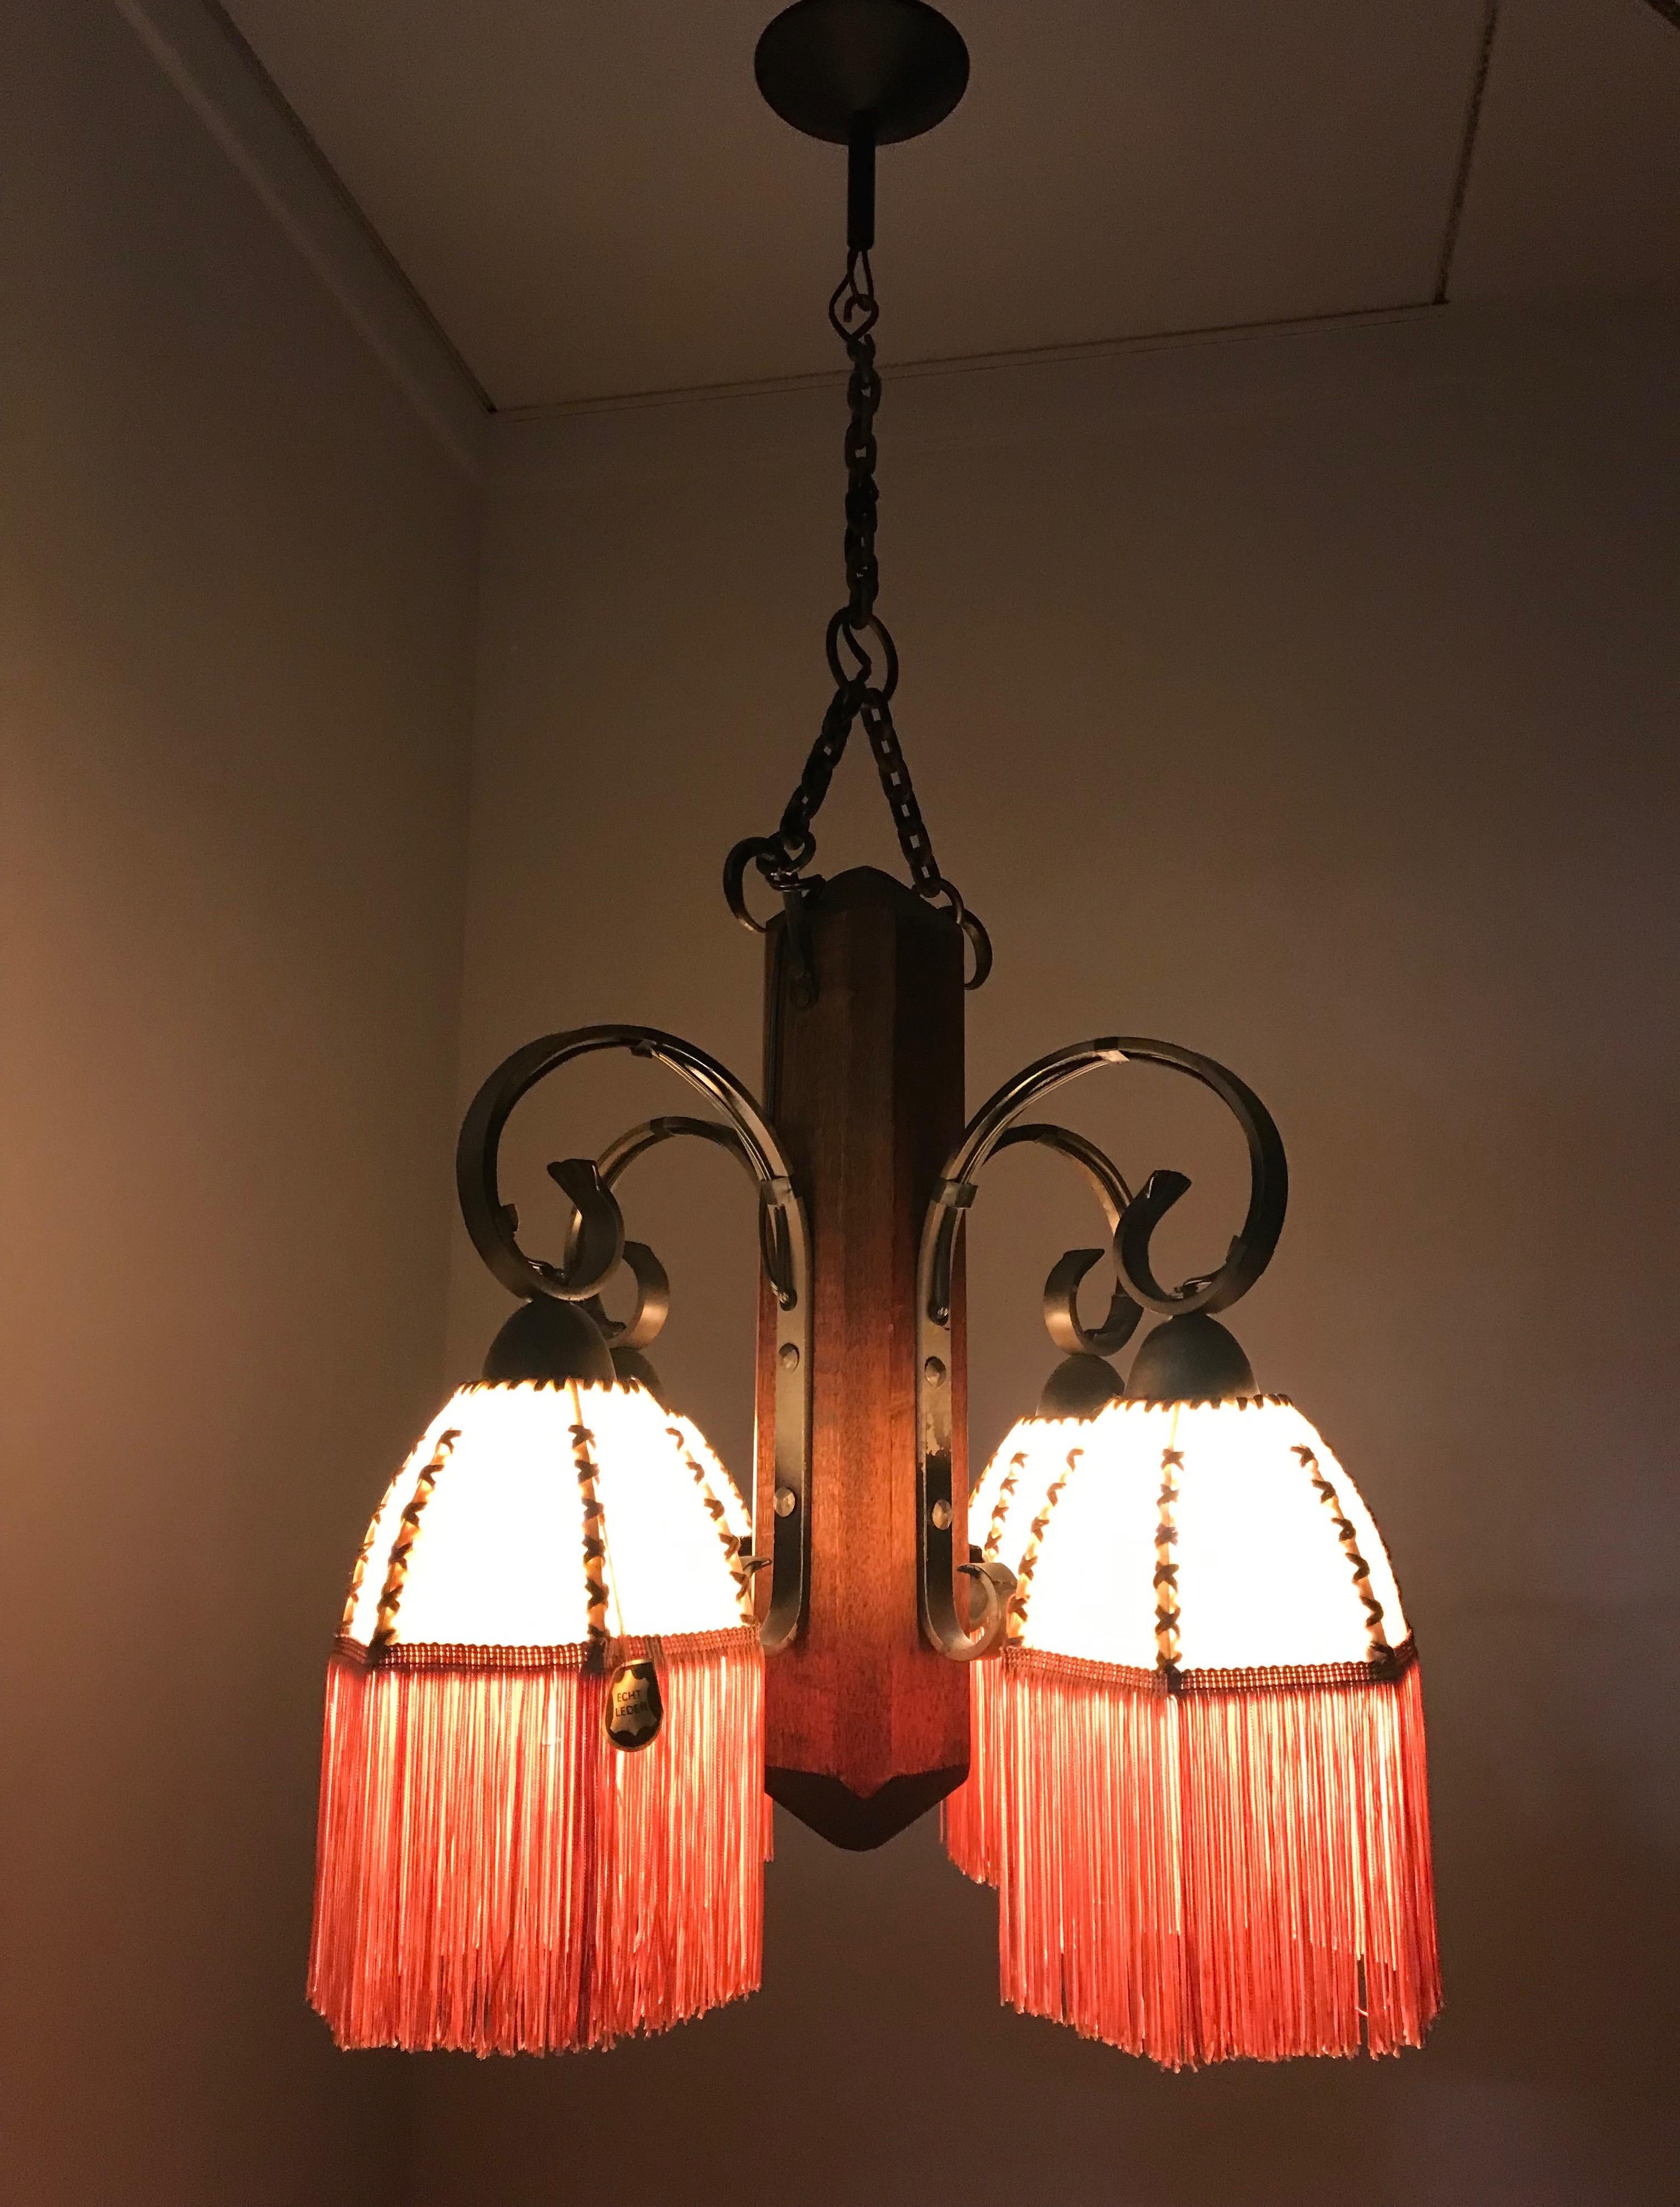 Rare Wrought Iron and Wood Pendant Light Fixture with Leather Shades and Fringes For Sale 7